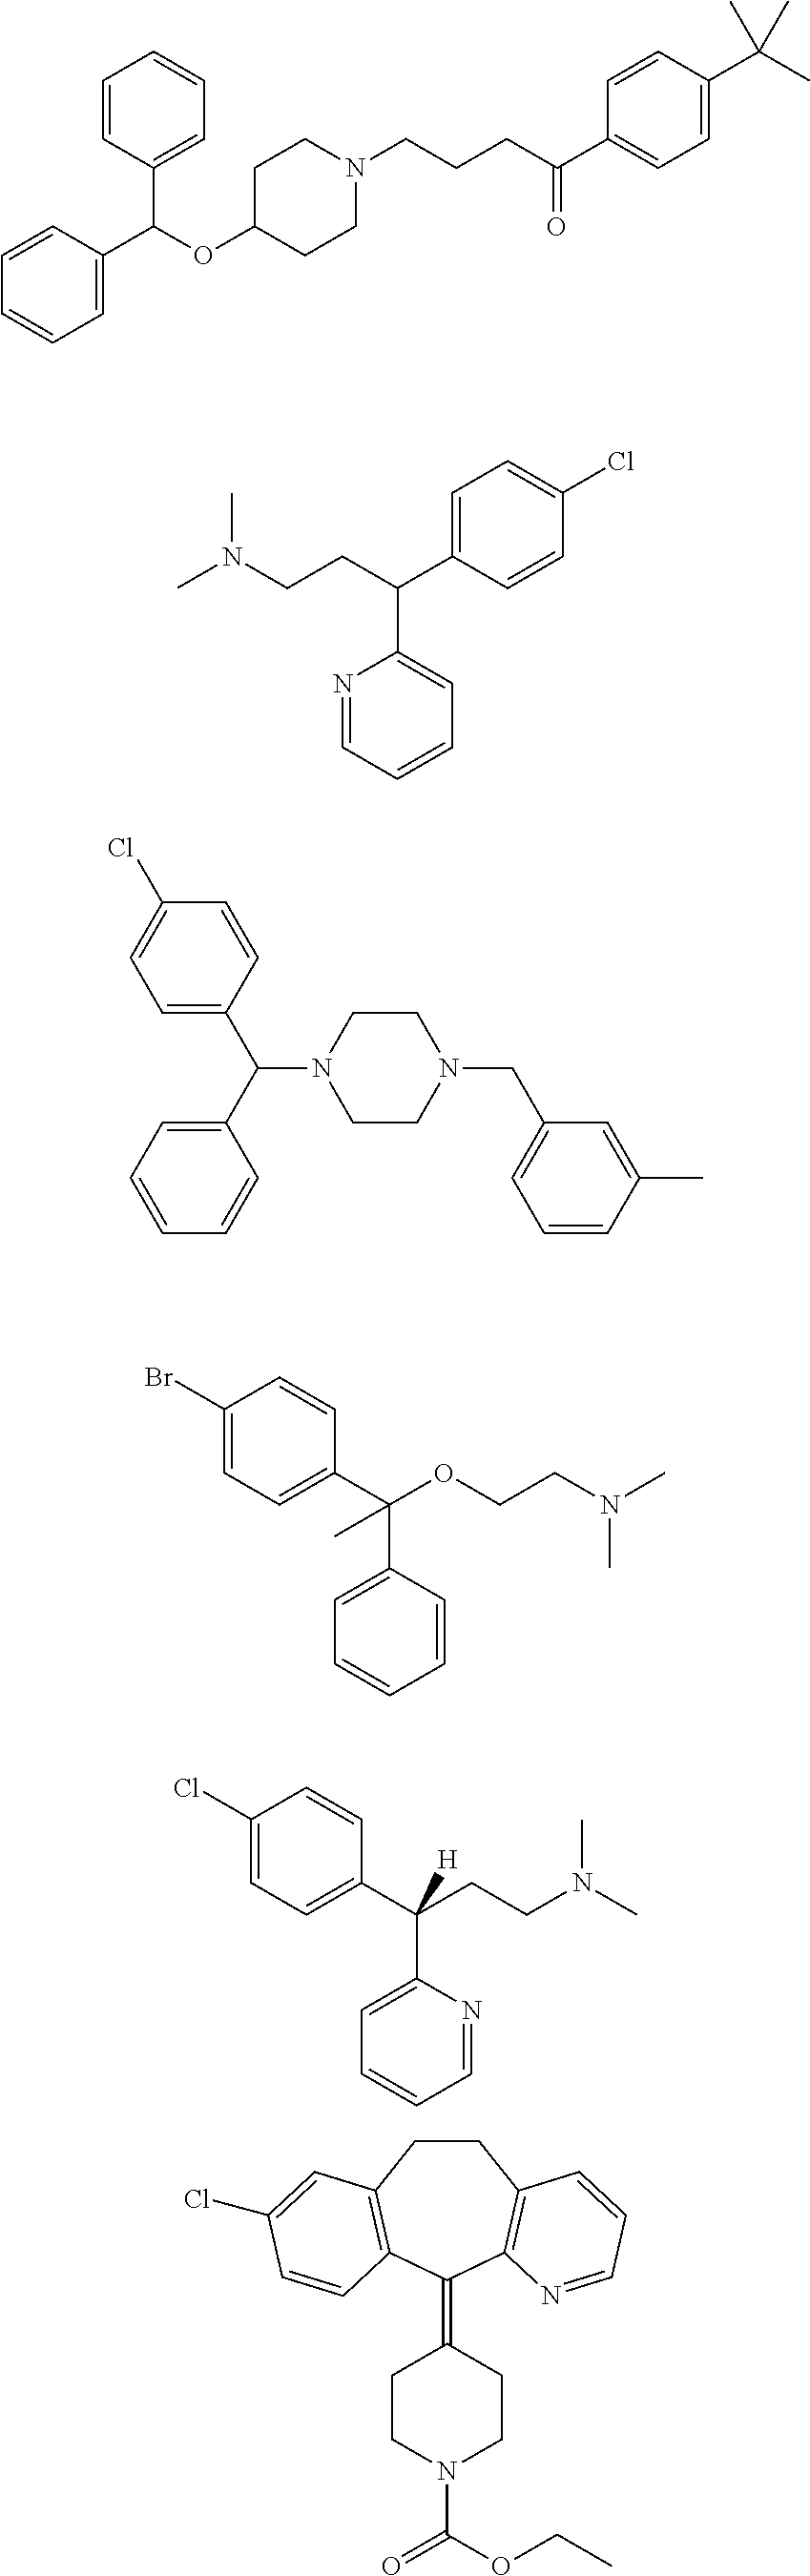 Systems and methods for treatment of allergies and other indications